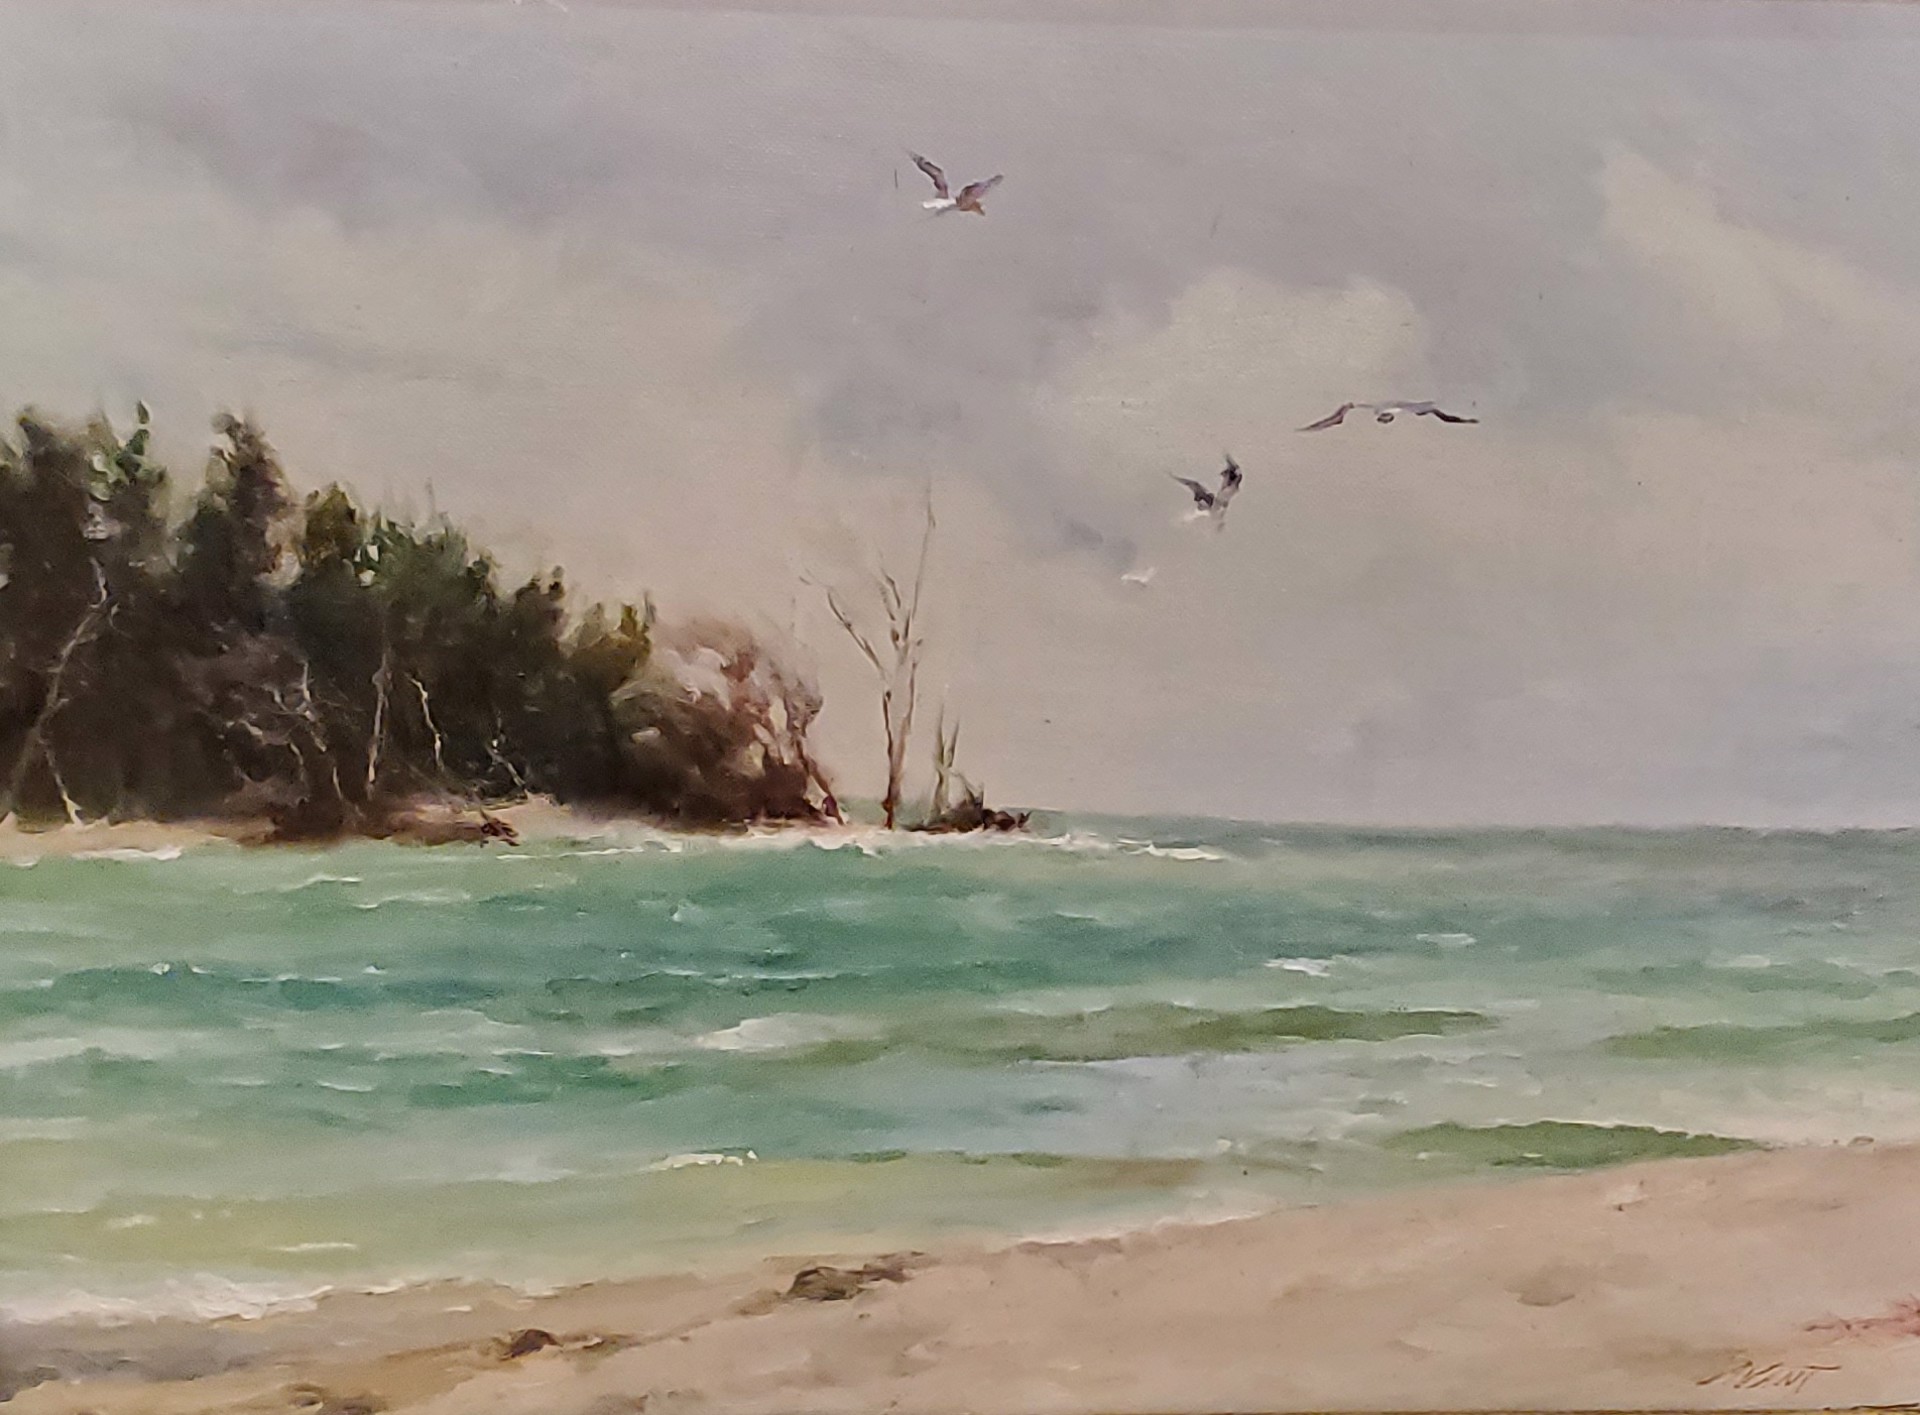 Seagulls Descending on Beer Can Island by Dominic Avant